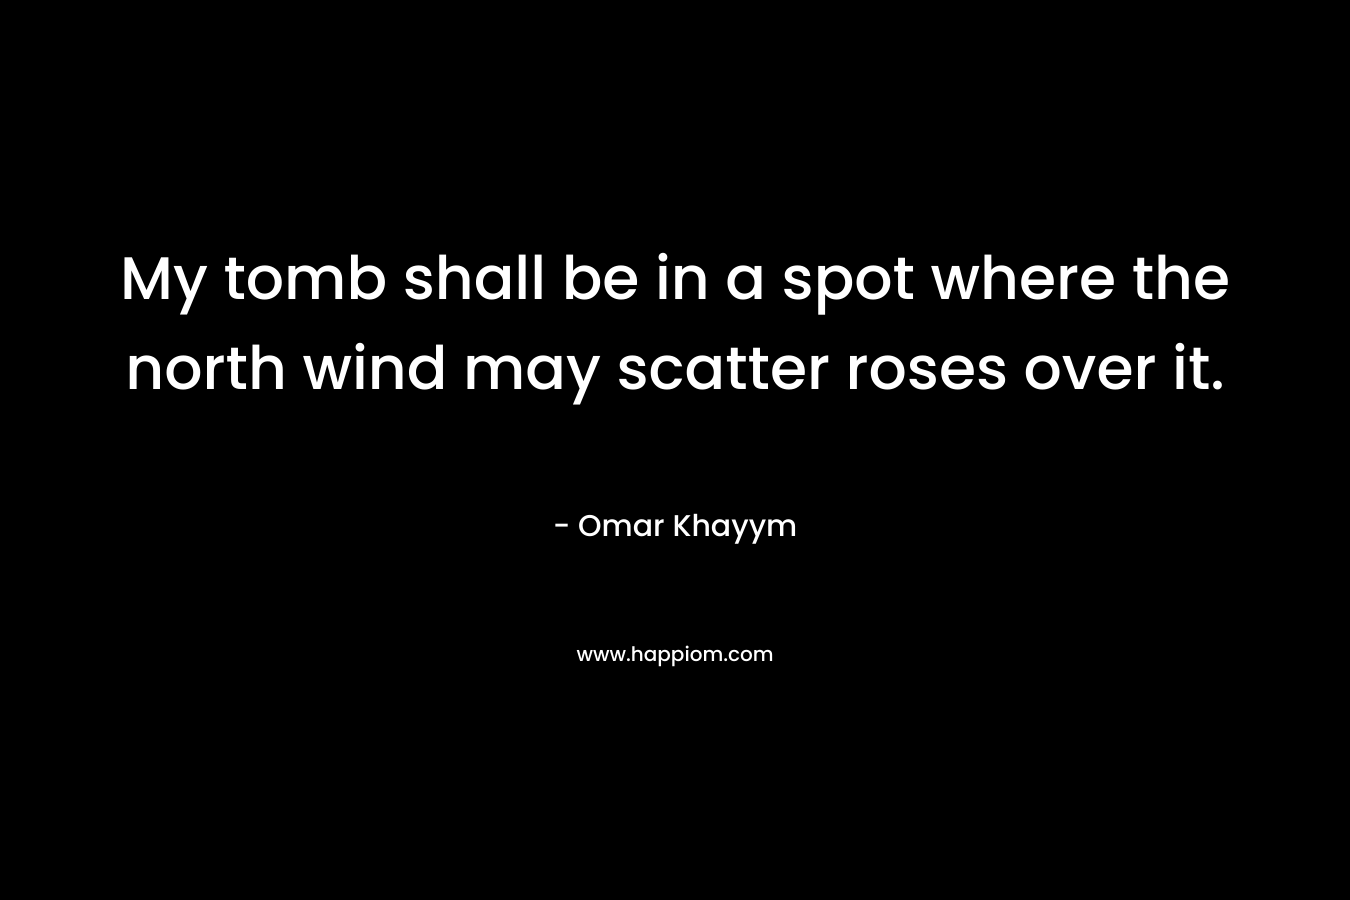 My tomb shall be in a spot where the north wind may scatter roses over it.